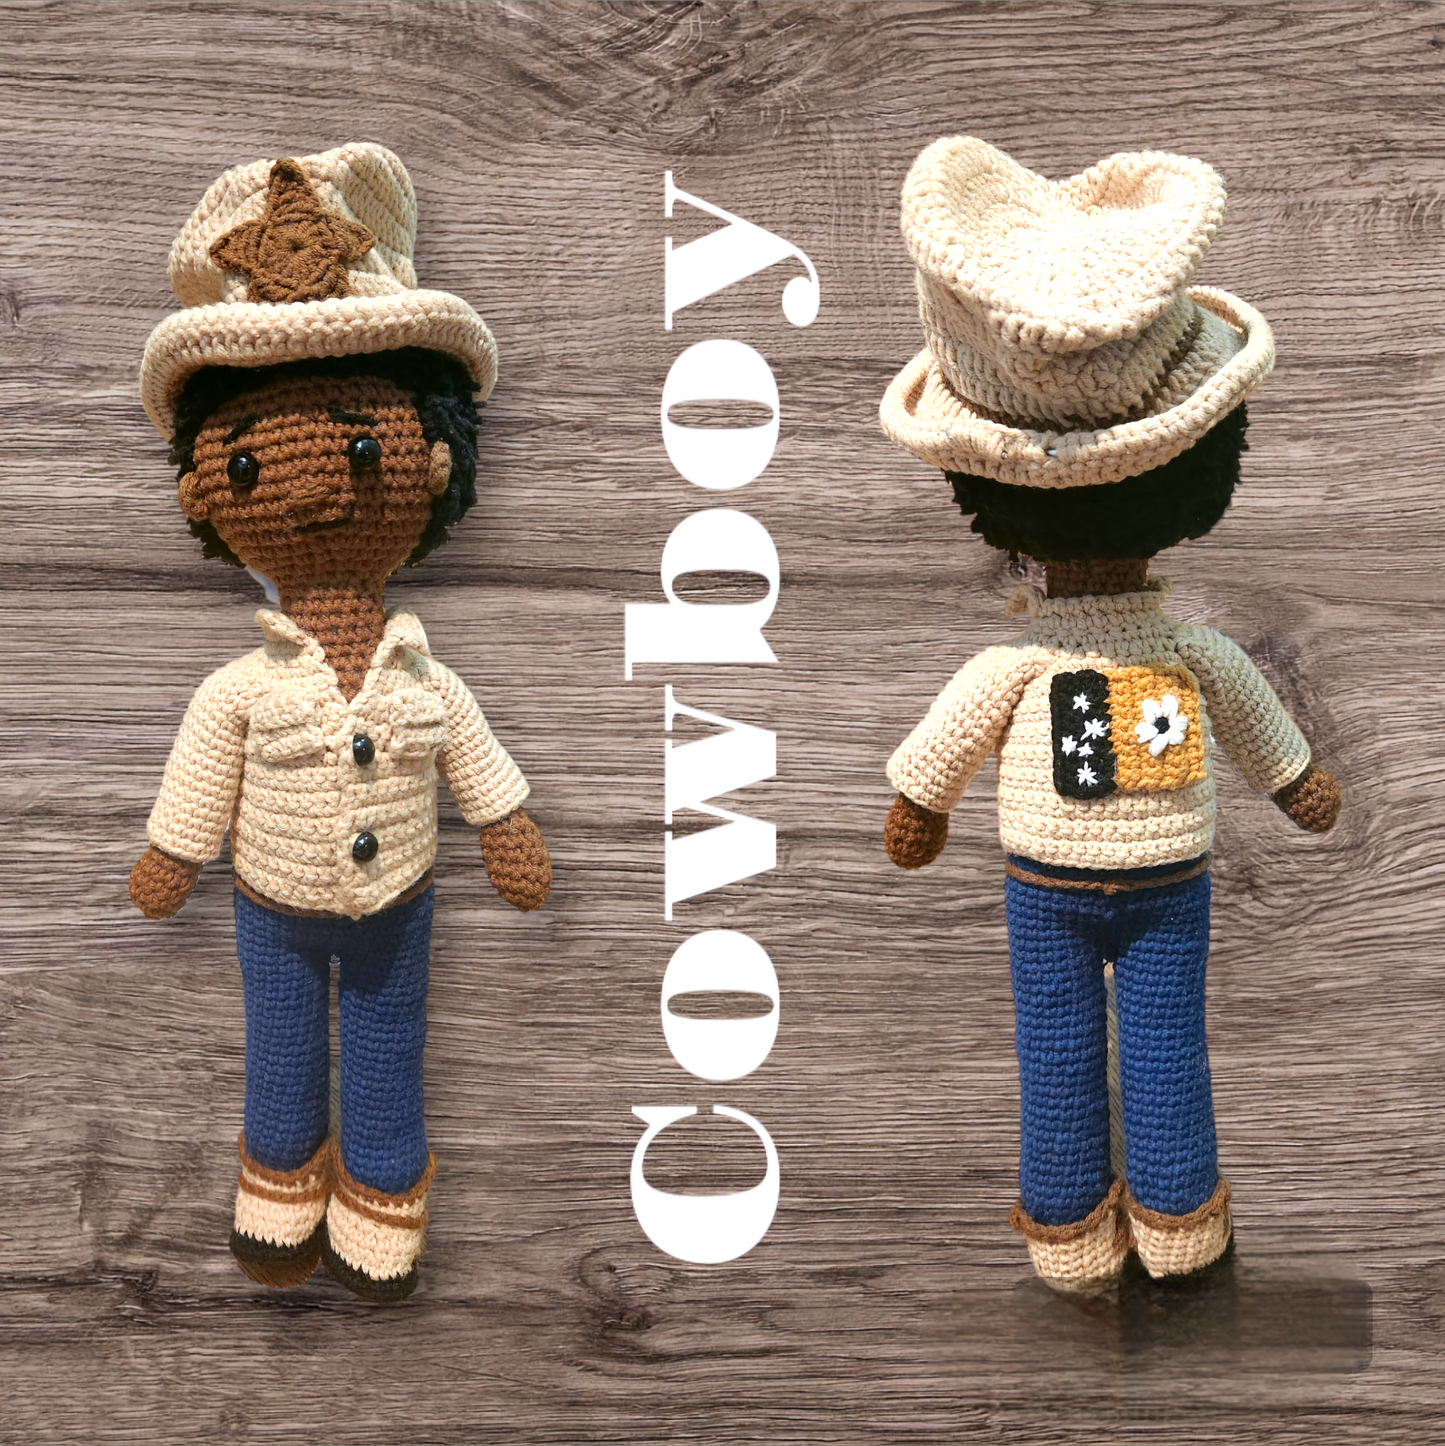 Customisable Cowboy Dolls: Handcrafted with Love - Order Now!"